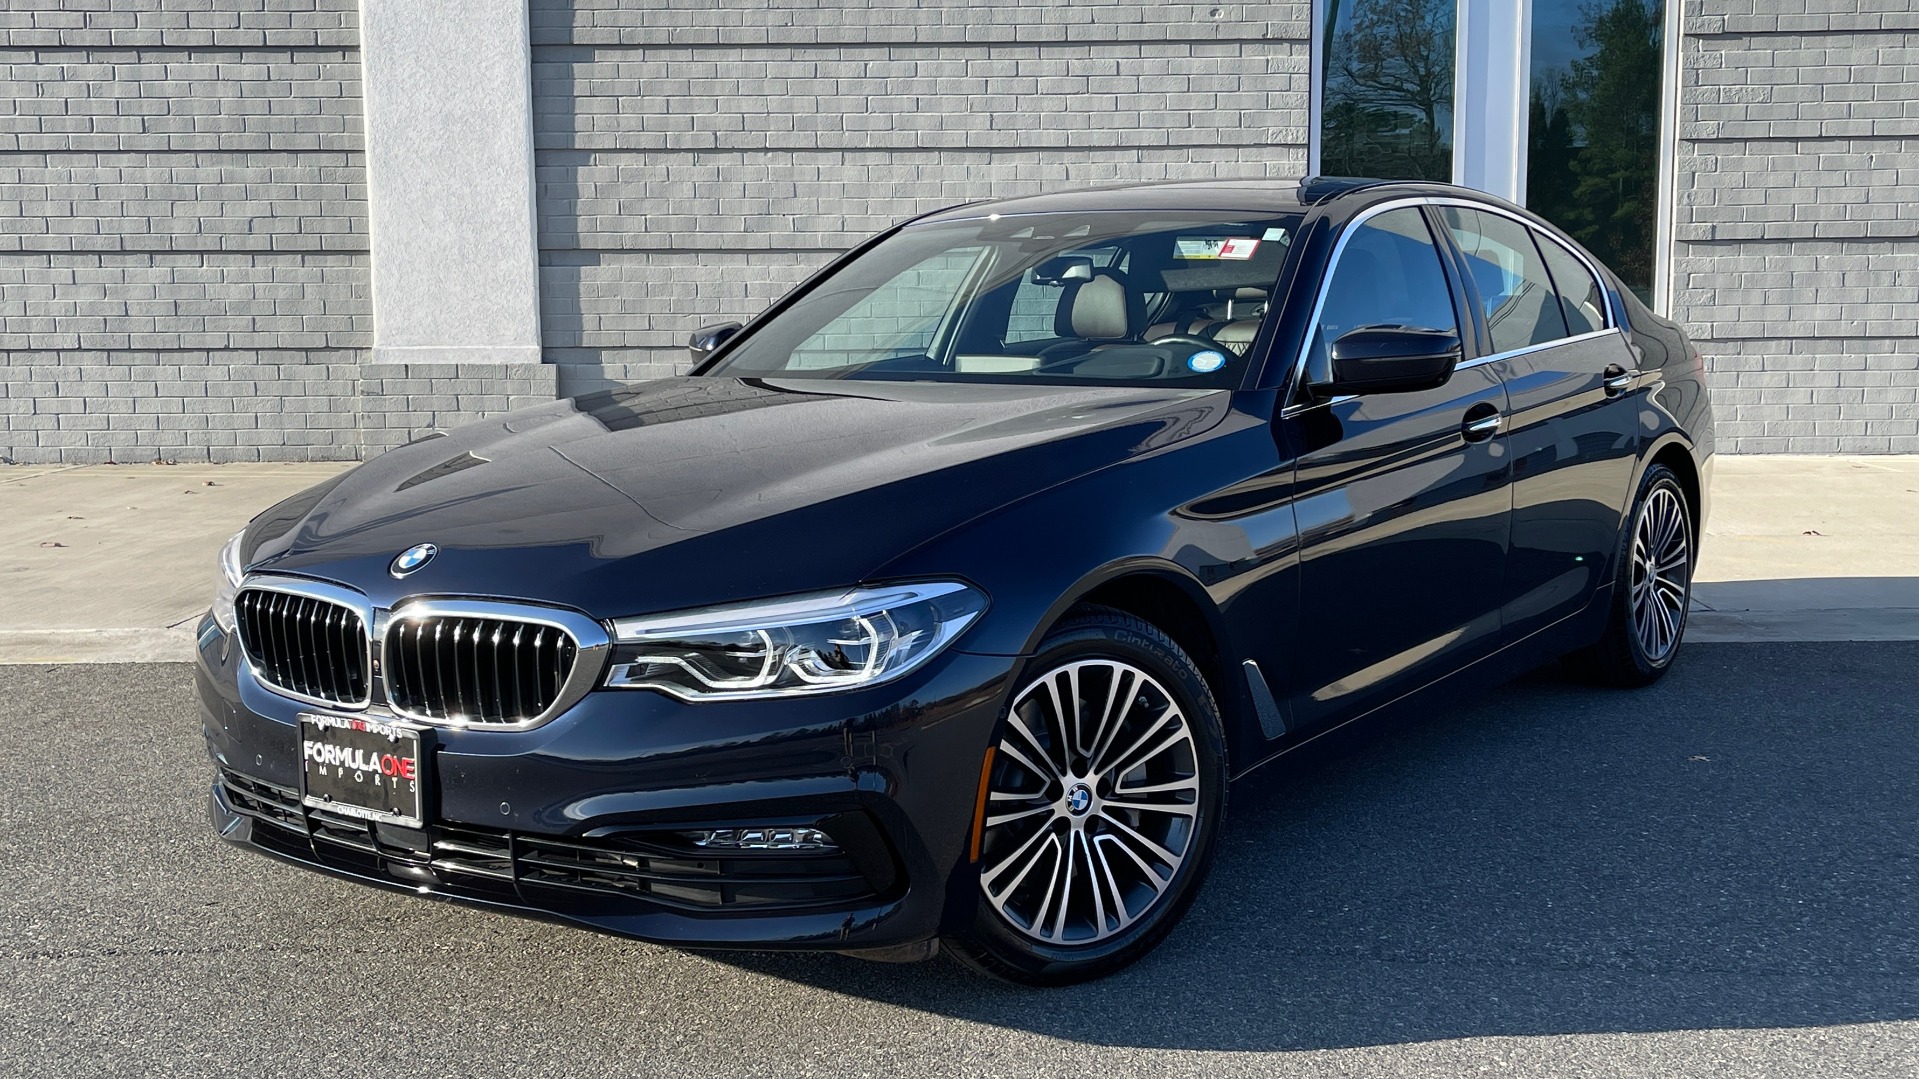 Used 2018 BMW 5 SERIES 530I XDRIVE PREMIUM / EXEC PKG / DRVR ASST PLUS / NAV / REARVIEW for sale Sold at Formula Imports in Charlotte NC 28227 1